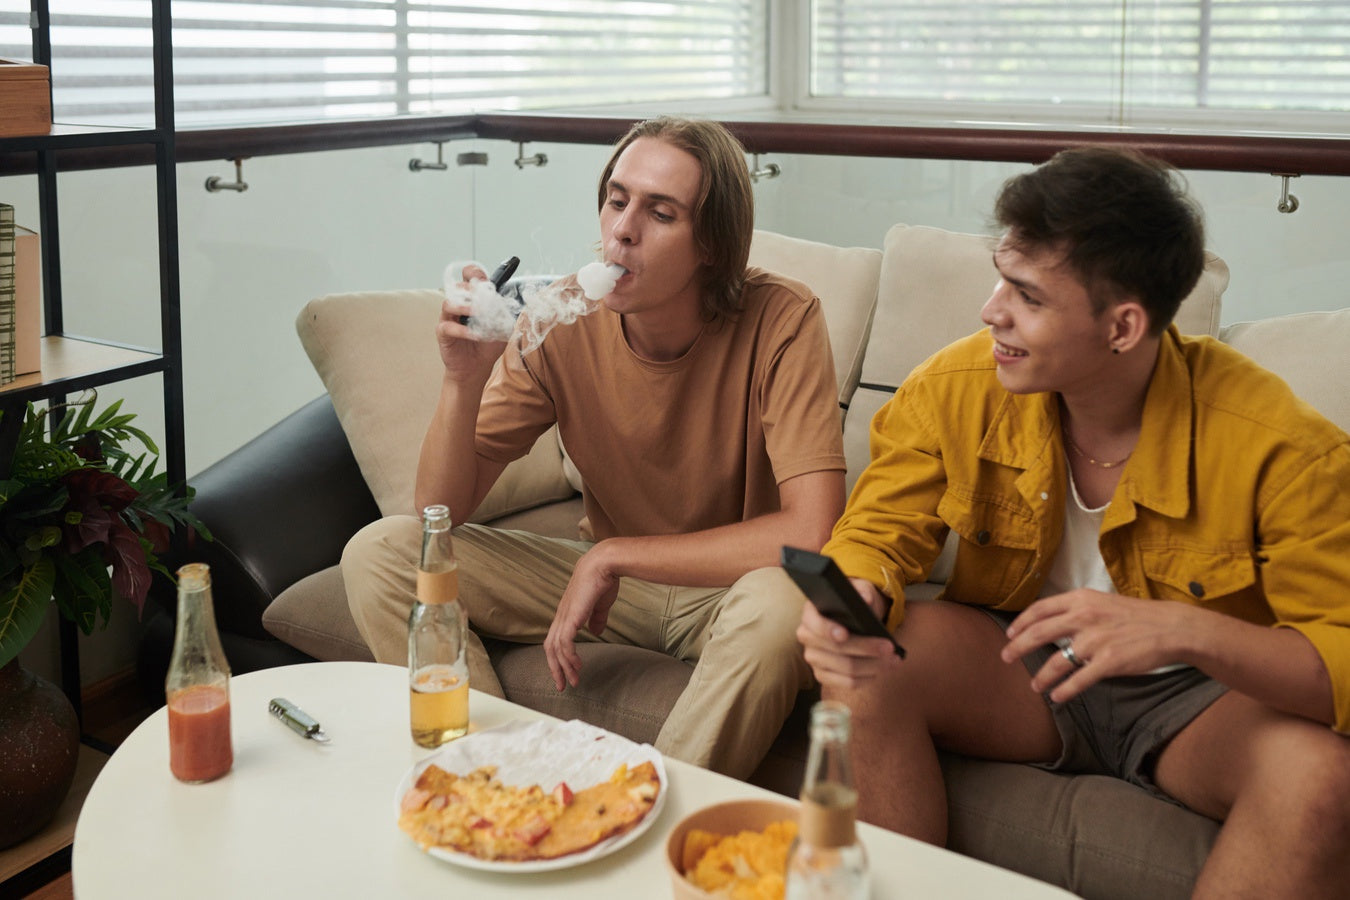 Man vaping on couch next to friend who is not vaping